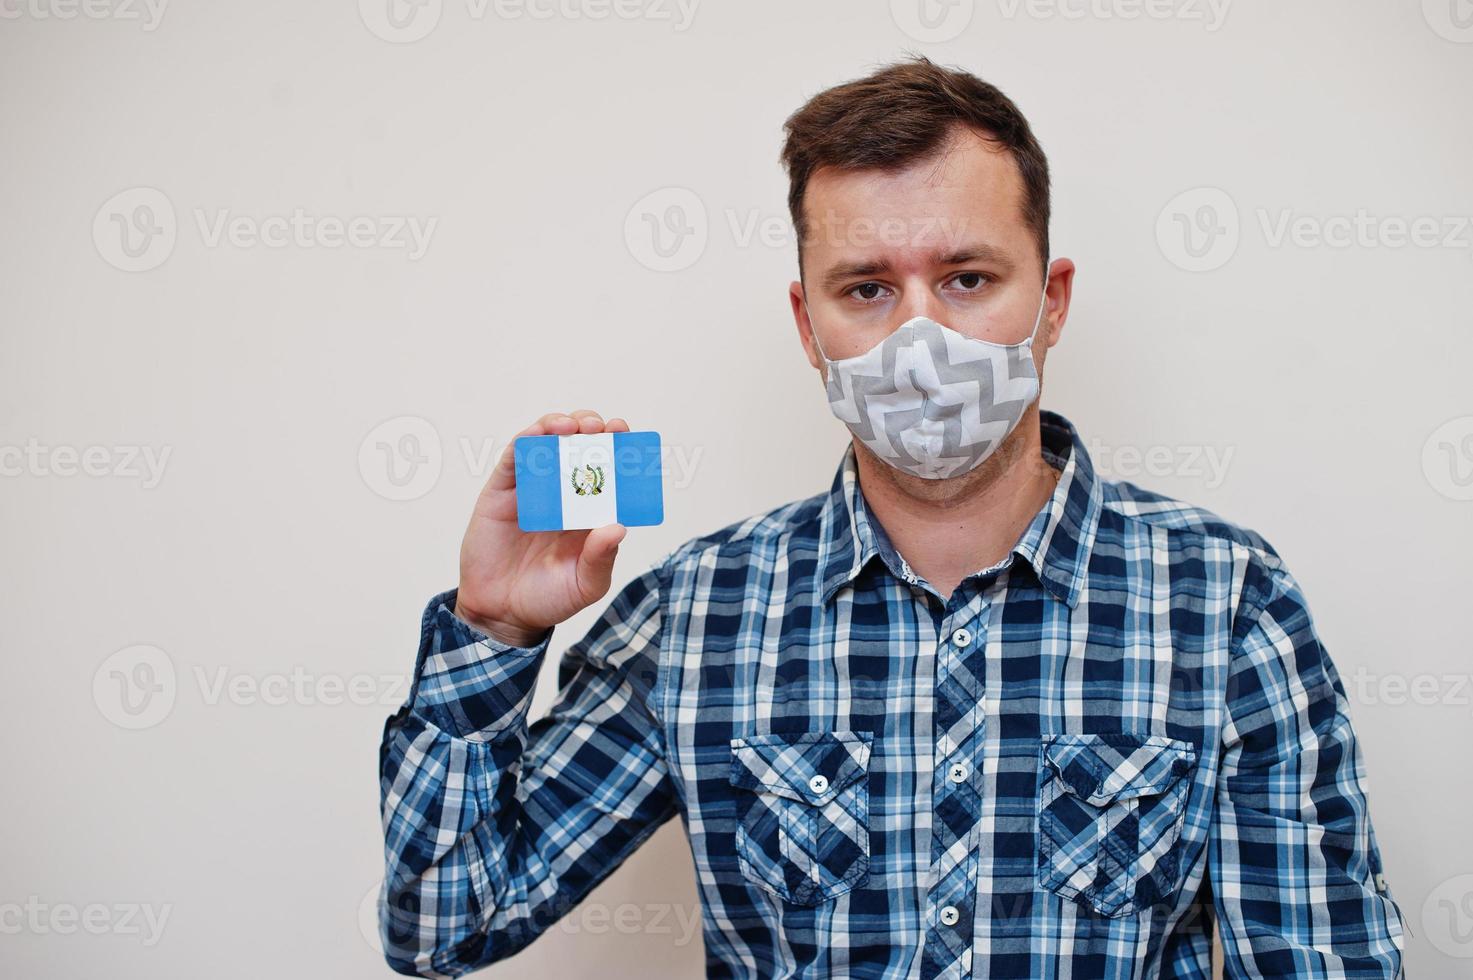 Man in checkered shirt show Guatemala flag card in hand, wear protect mask isolated on white background. American countries Coronavirus concept. photo